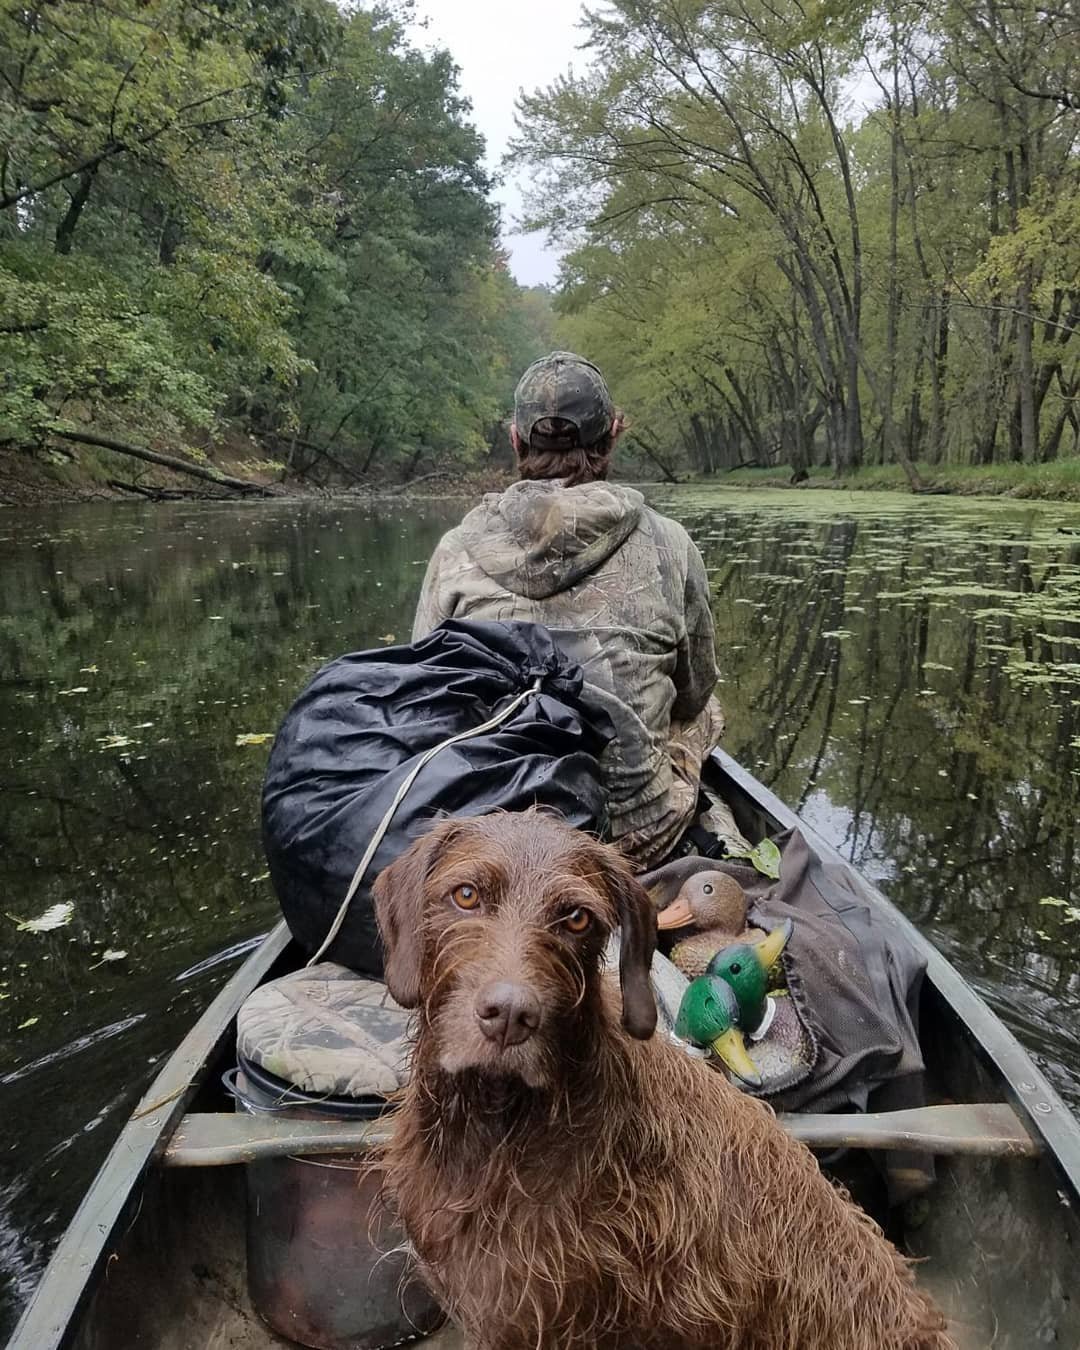 We had a fun morning duck hunting.&nbsp;Choco had some great retrieves and enjoyed watching the skies with us for more incoming ducks. When it was time to quit, you could see the disappointment in her expression. (Pictured here are Choco and Jacob.)